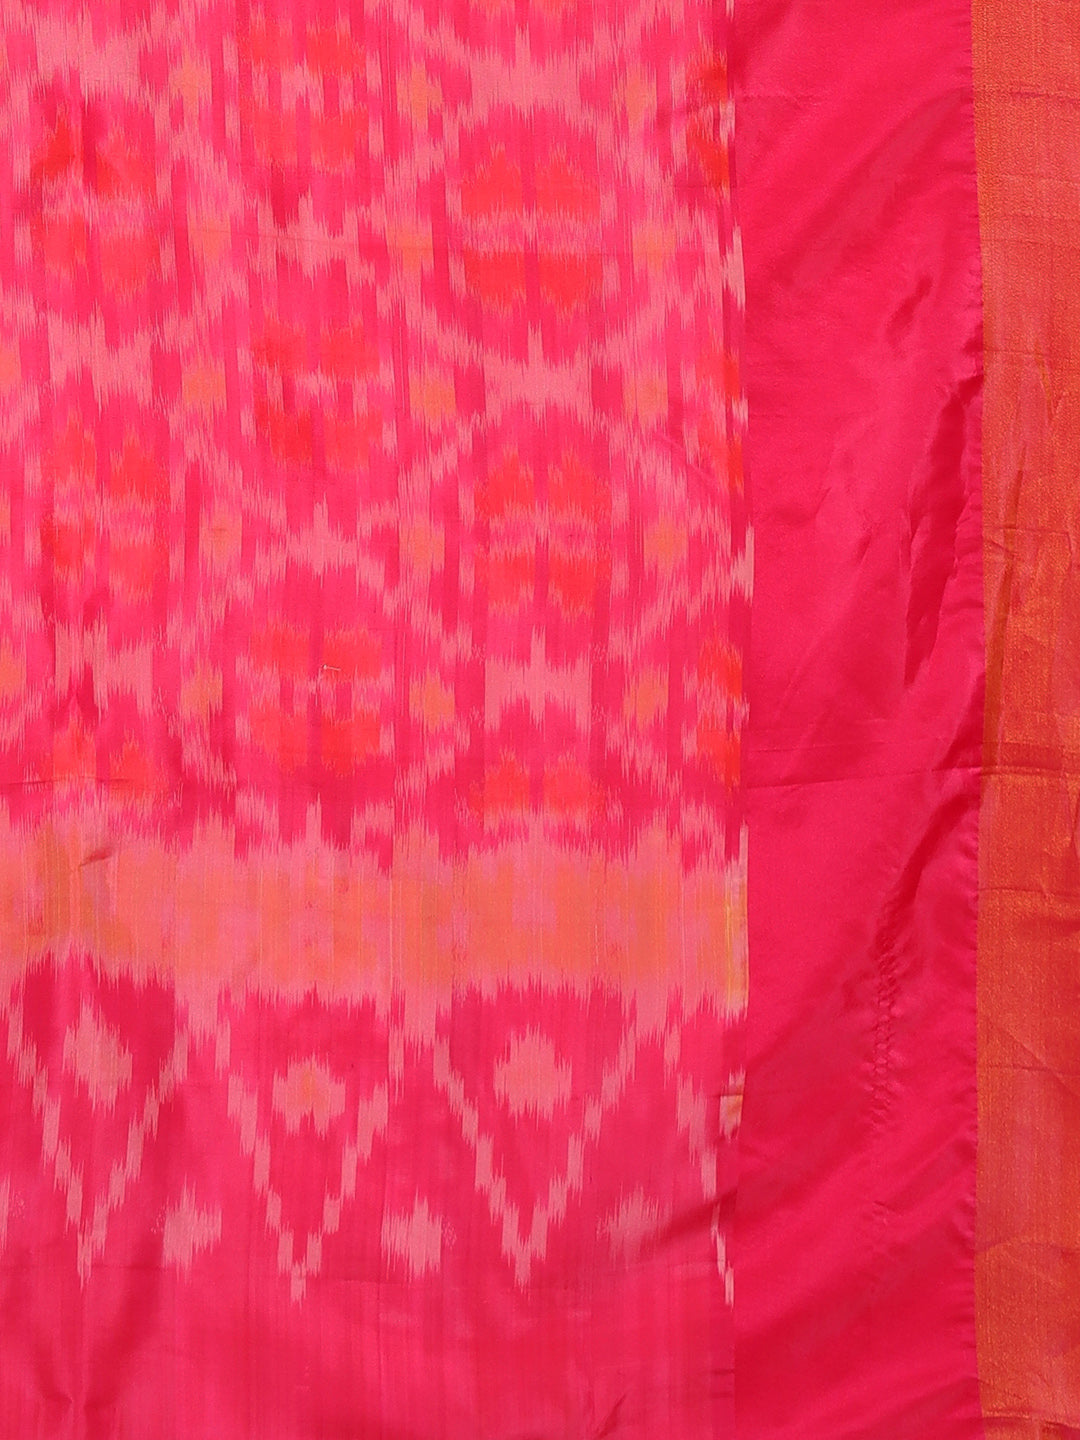 Kalakari India Upppada Silk Woven Saree With Blouse SKHSSA0001-Saree-Kalakari India-SKHSSA0001-Bollywood, Geographical Indication, Hand Crafted, Heritage Prints, Natural Dyes, Sarees, South Silk, Sustainable Fabrics, Uppada Silk, Woven-[Linen,Ethnic,wear,Fashionista,Handloom,Handicraft,Indigo,blockprint,block,print,Cotton,Chanderi,Blue, latest,classy,party,bollywood,trendy,summer,style,traditional,formal,elegant,unique,style,hand,block,print, dabu,booti,gift,present,glamorous,affordable,collecti